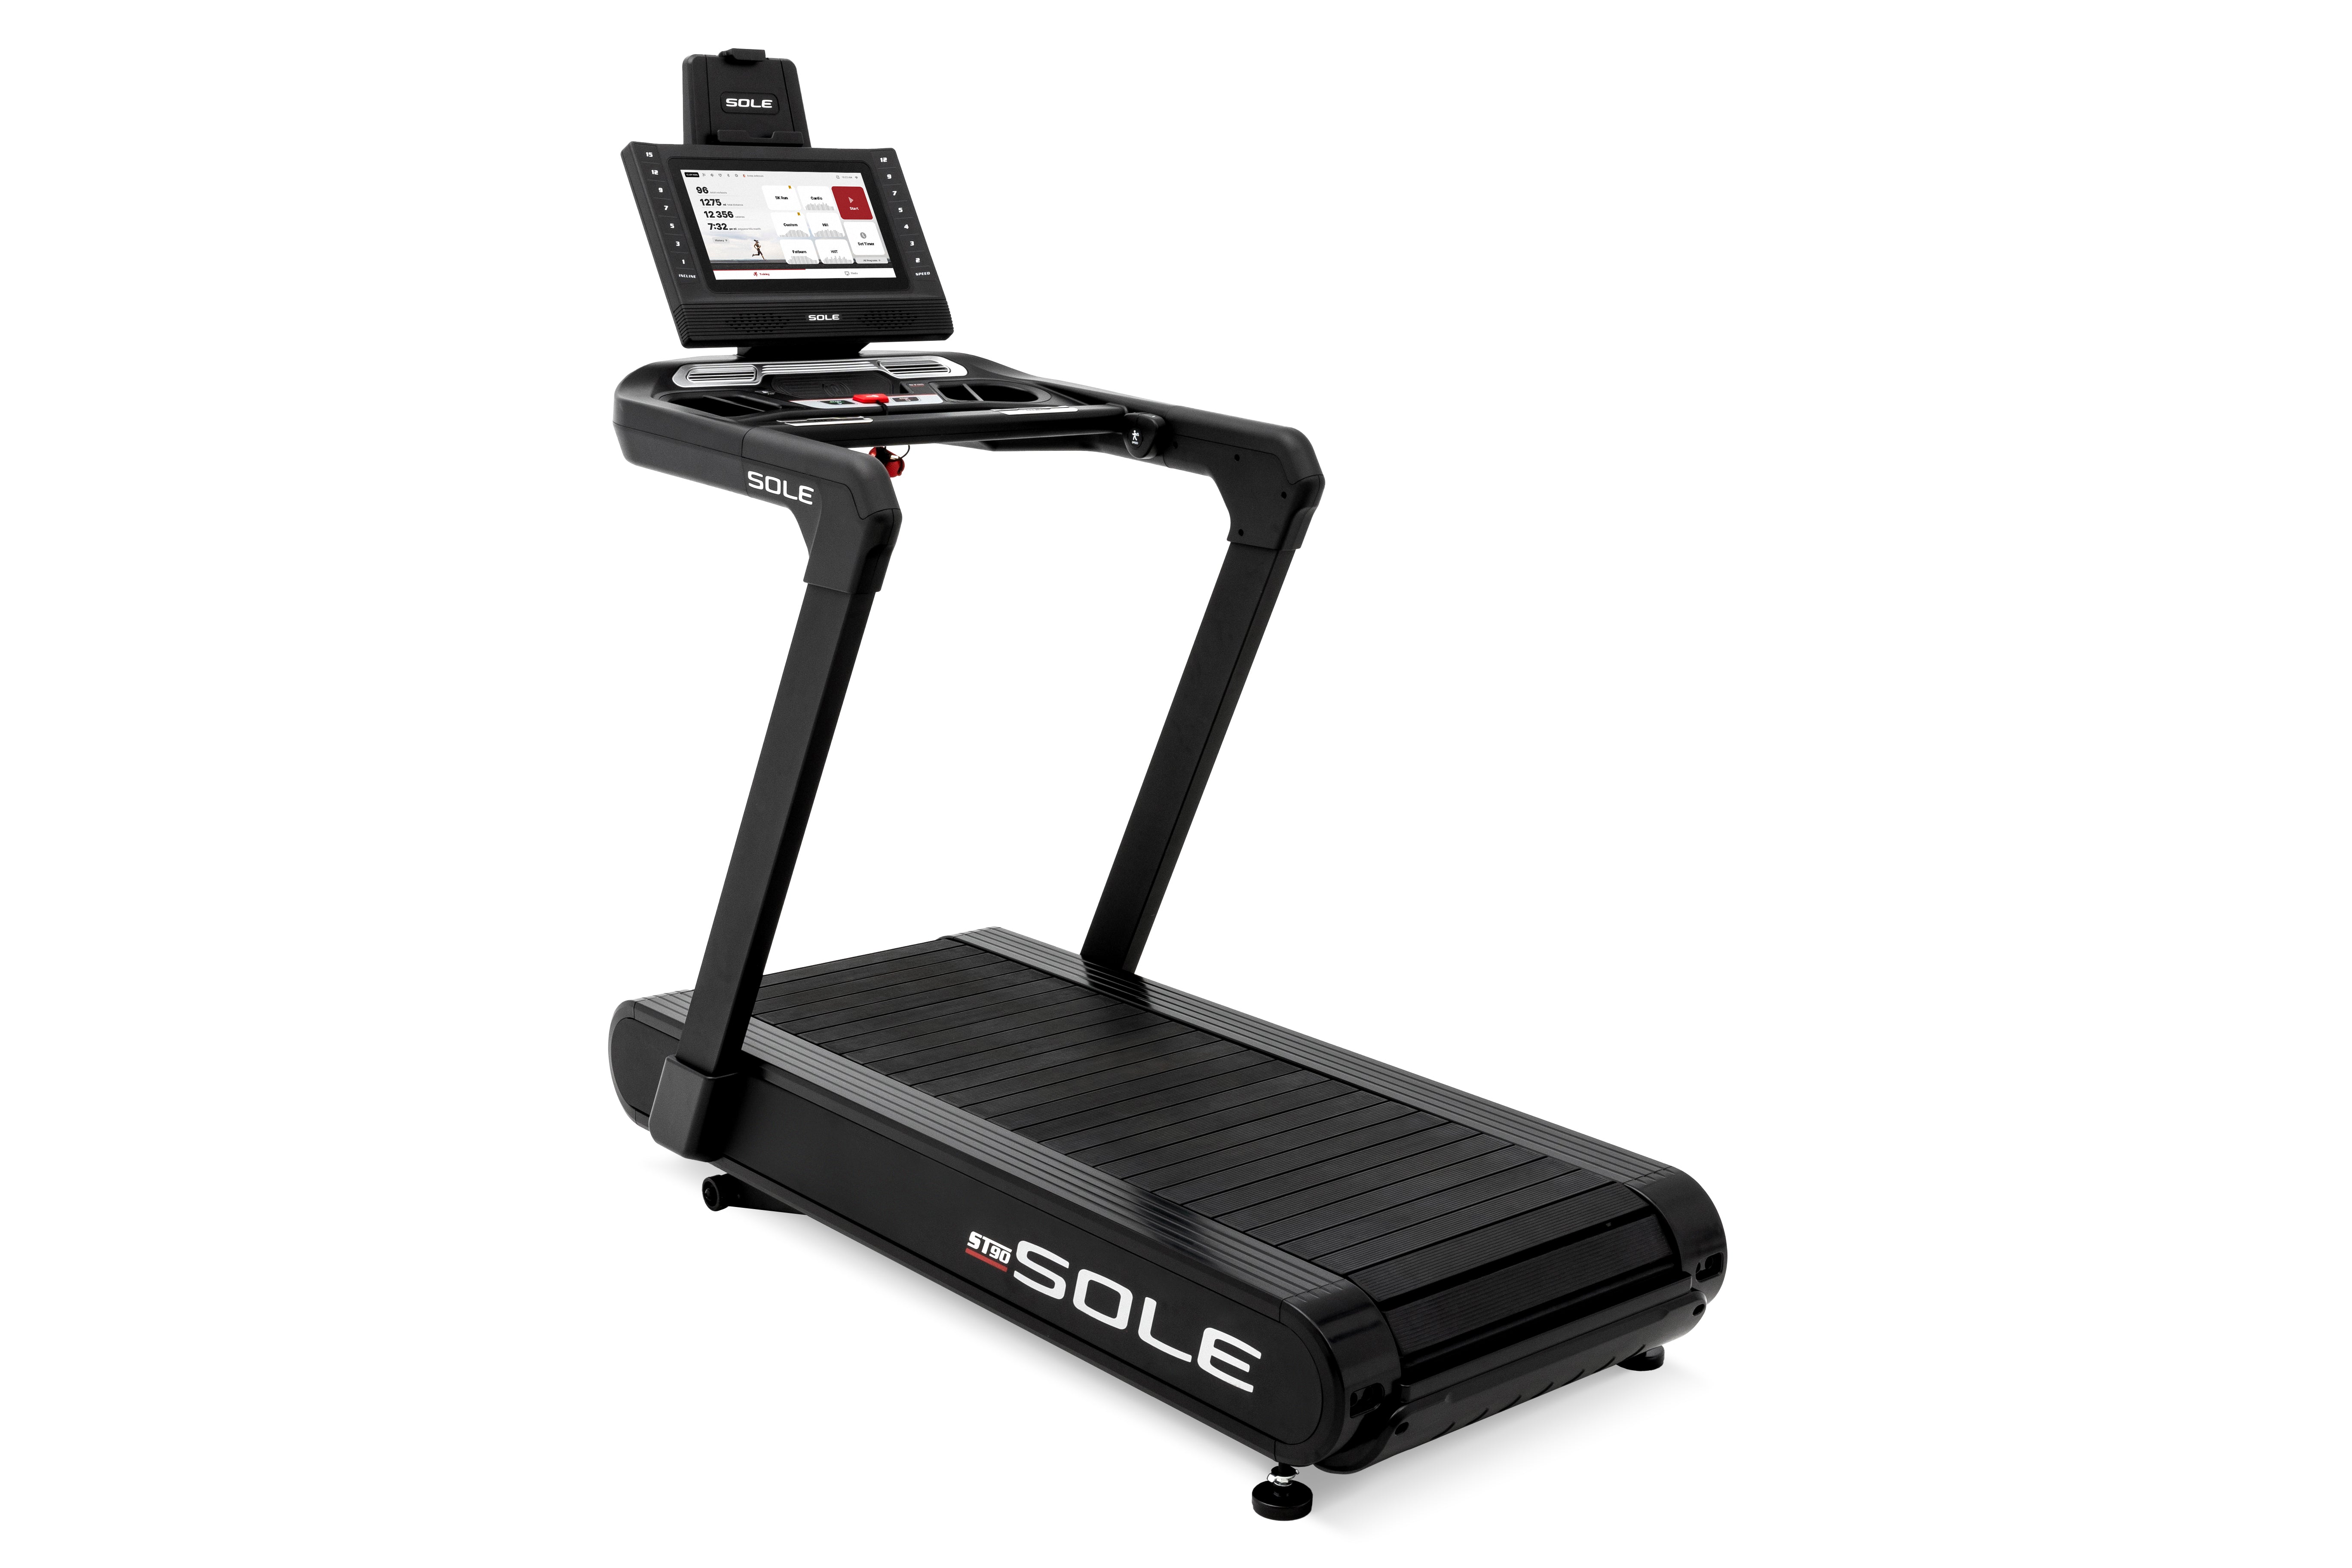 Side view of the Sole ST90 treadmill featuring a digital console with a touchscreen display, sturdy handlebars, and a black running belt with the Sole ST90 logo, set against a white background.